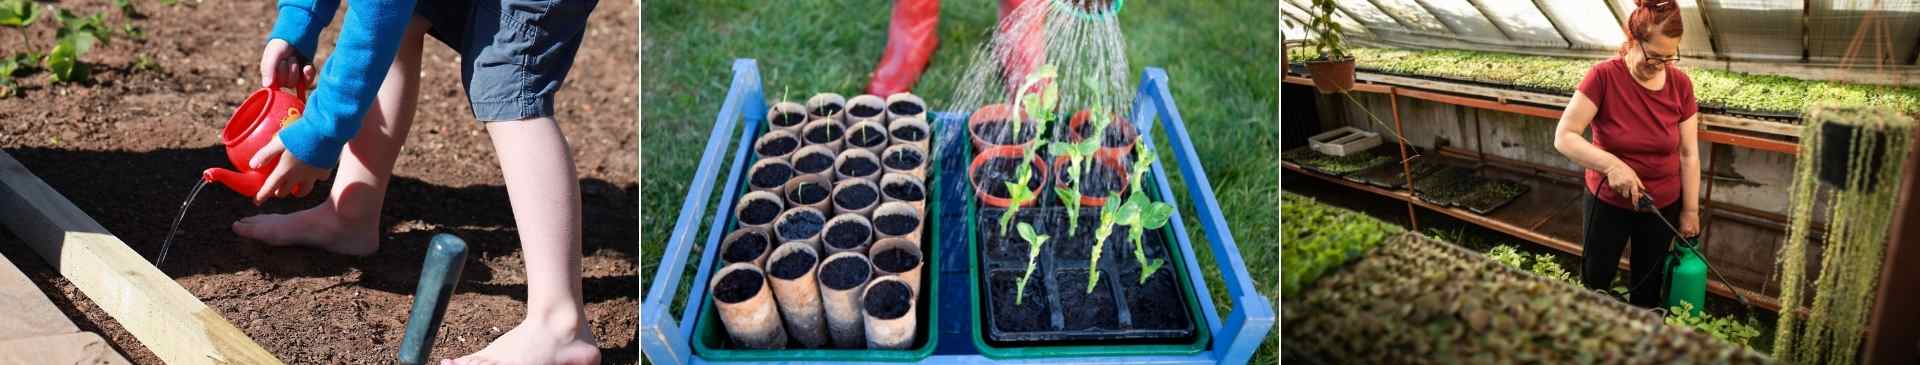 How to Water Seeds Safely Without Washing Them Away